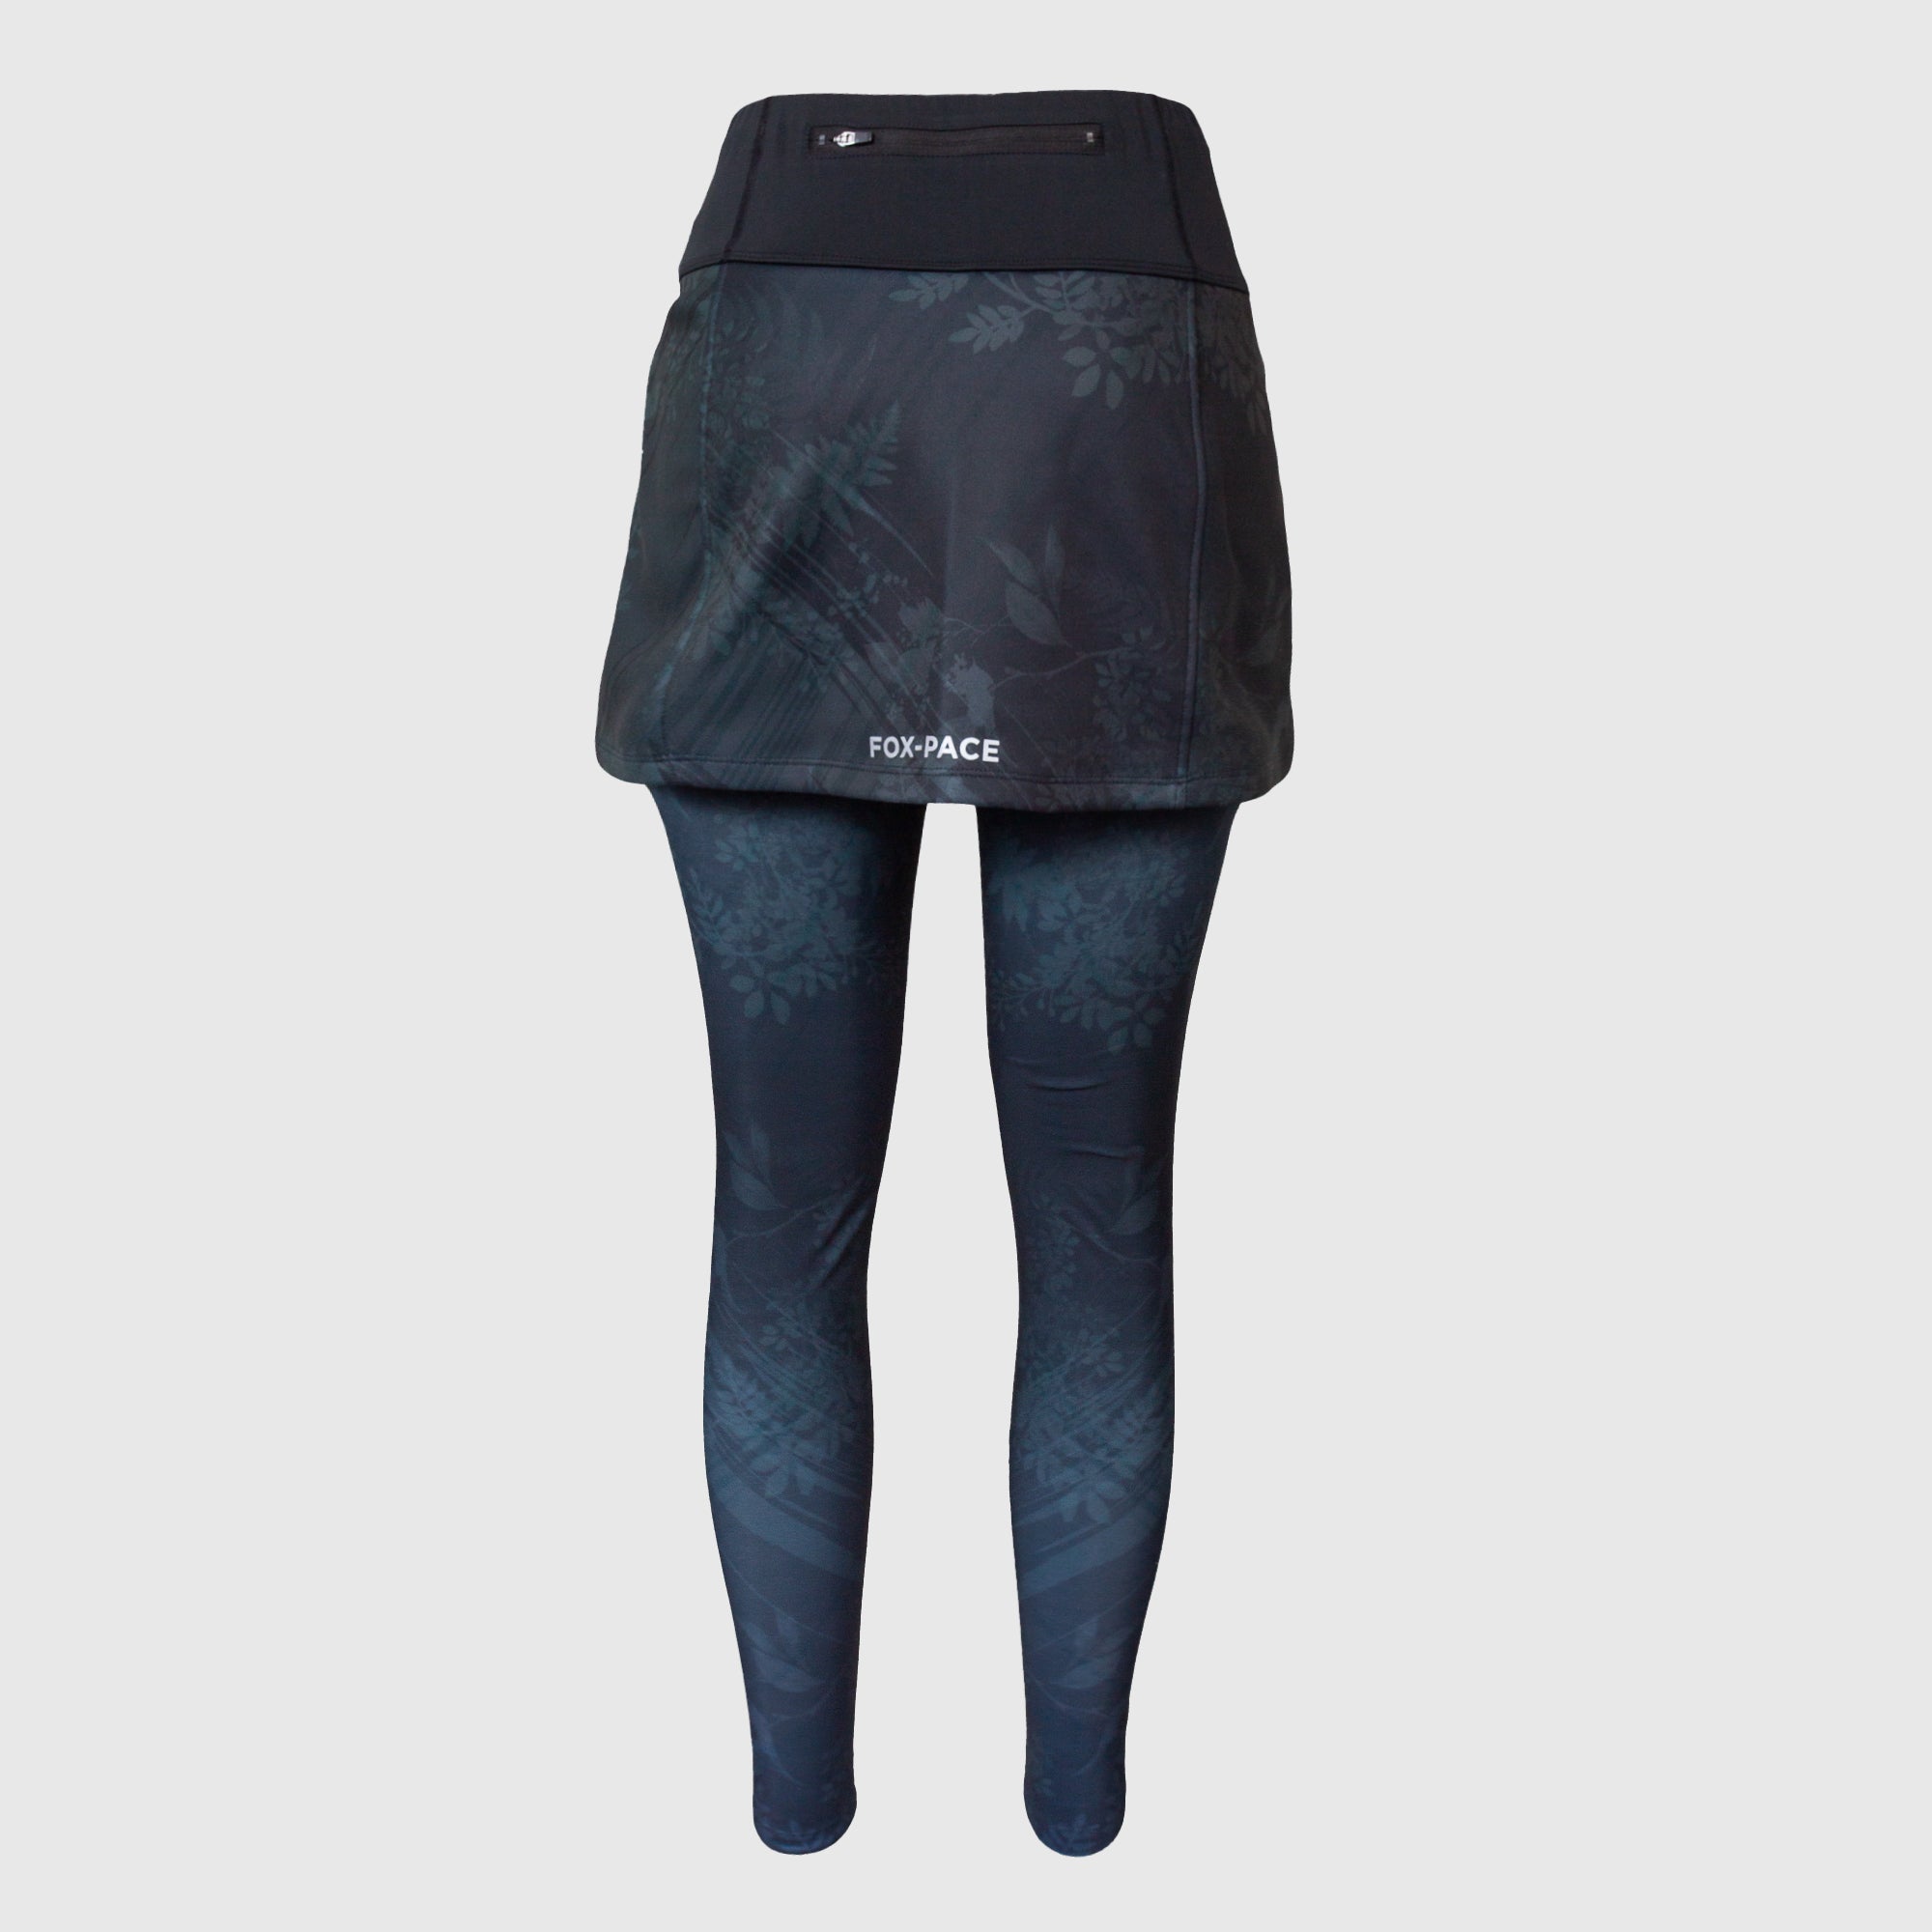 Warm winter running leggings with an over skirt and brushed inside - M